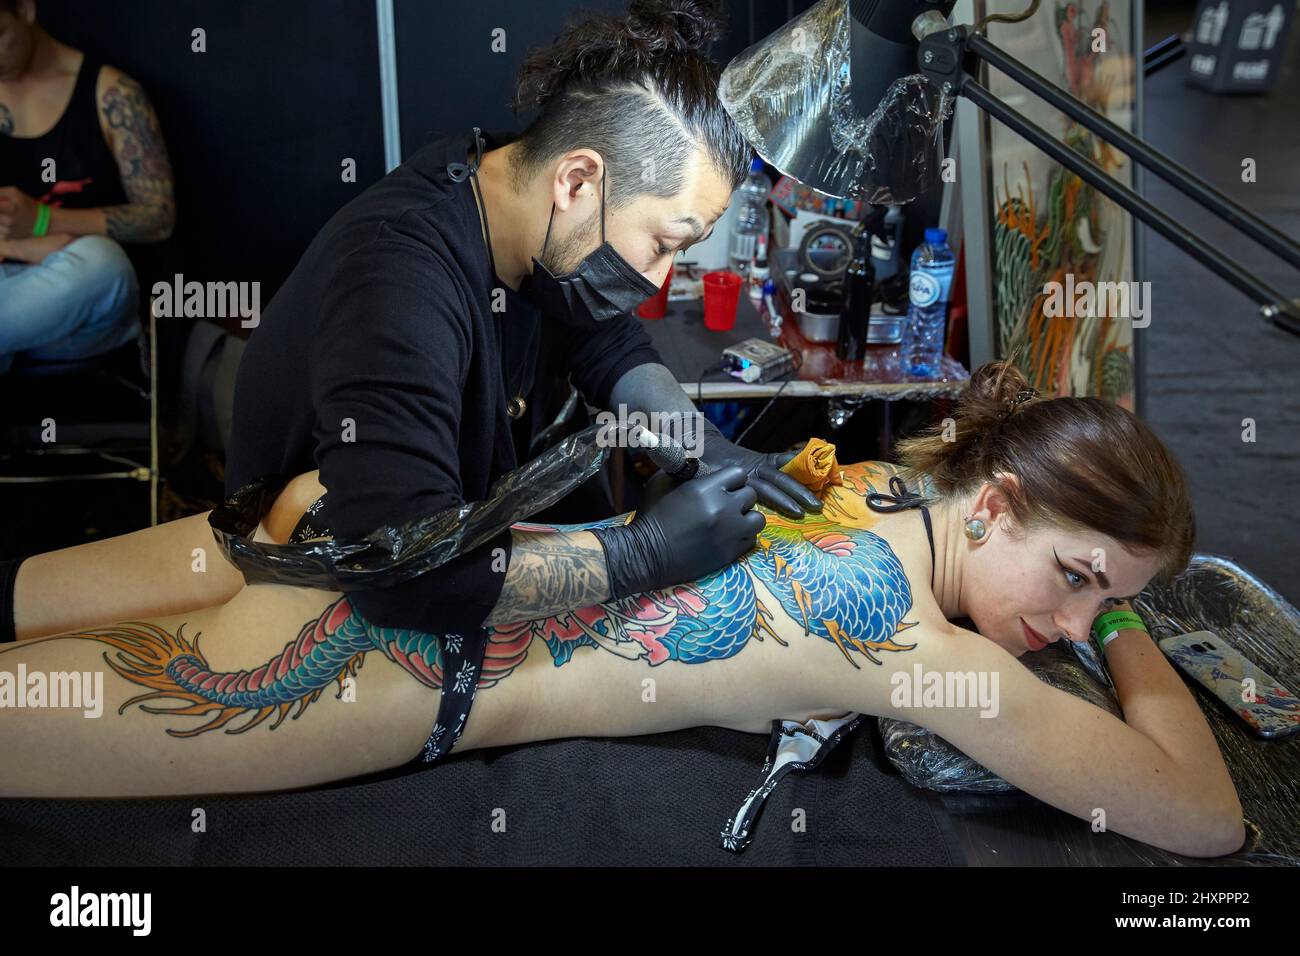 Some of the tattoo artists participating in the event making some of their designs in Amsterdam Stock Photo